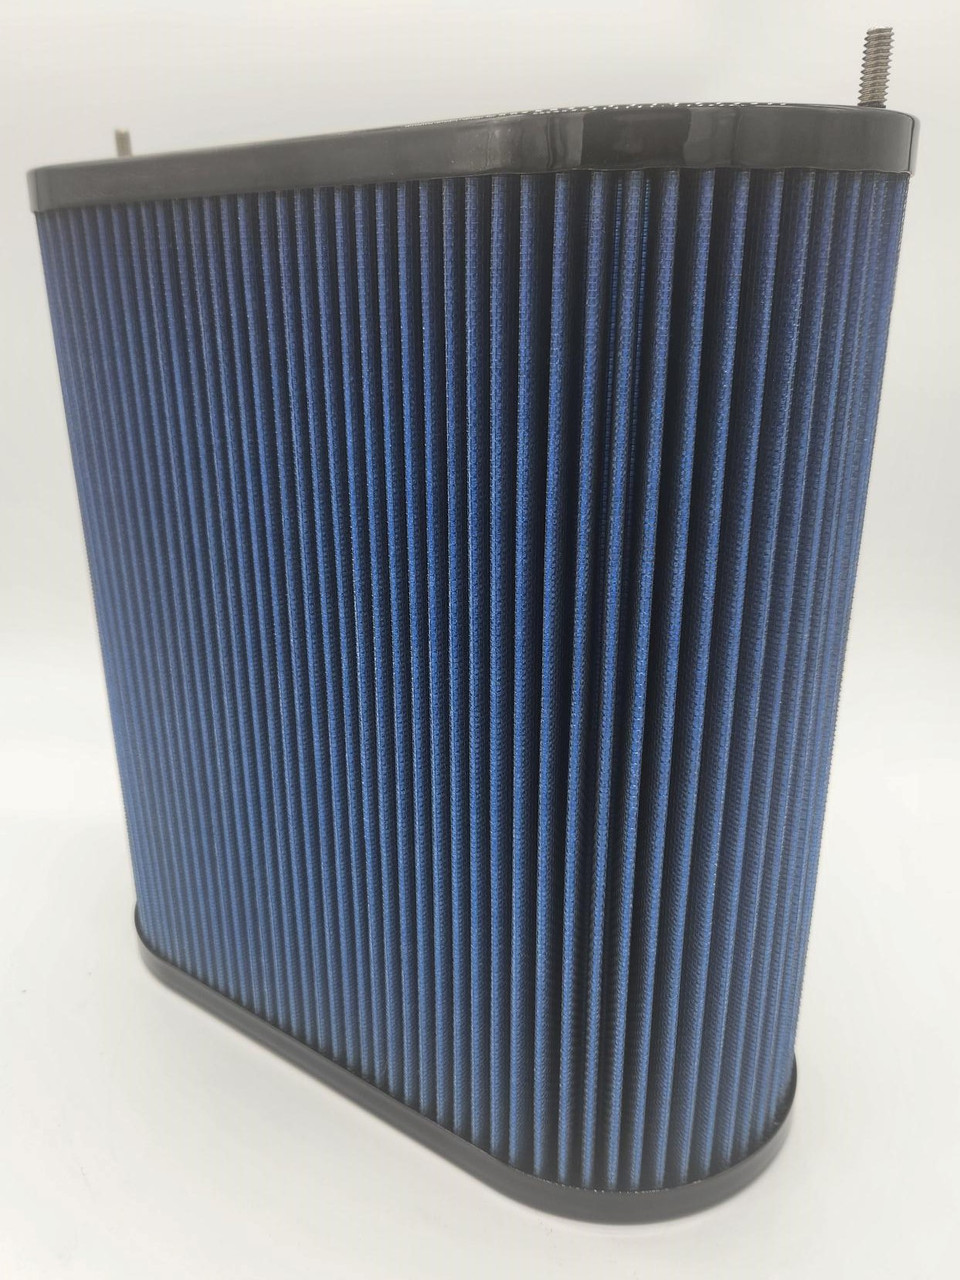 Cummins Replacement Air Filter 4930742 for Cummins M11 700HP & MAN 1550 engines.Used on Horizon Catamaran M11 engines
Oval 11" Tall x 10" Wide x 5" Depth